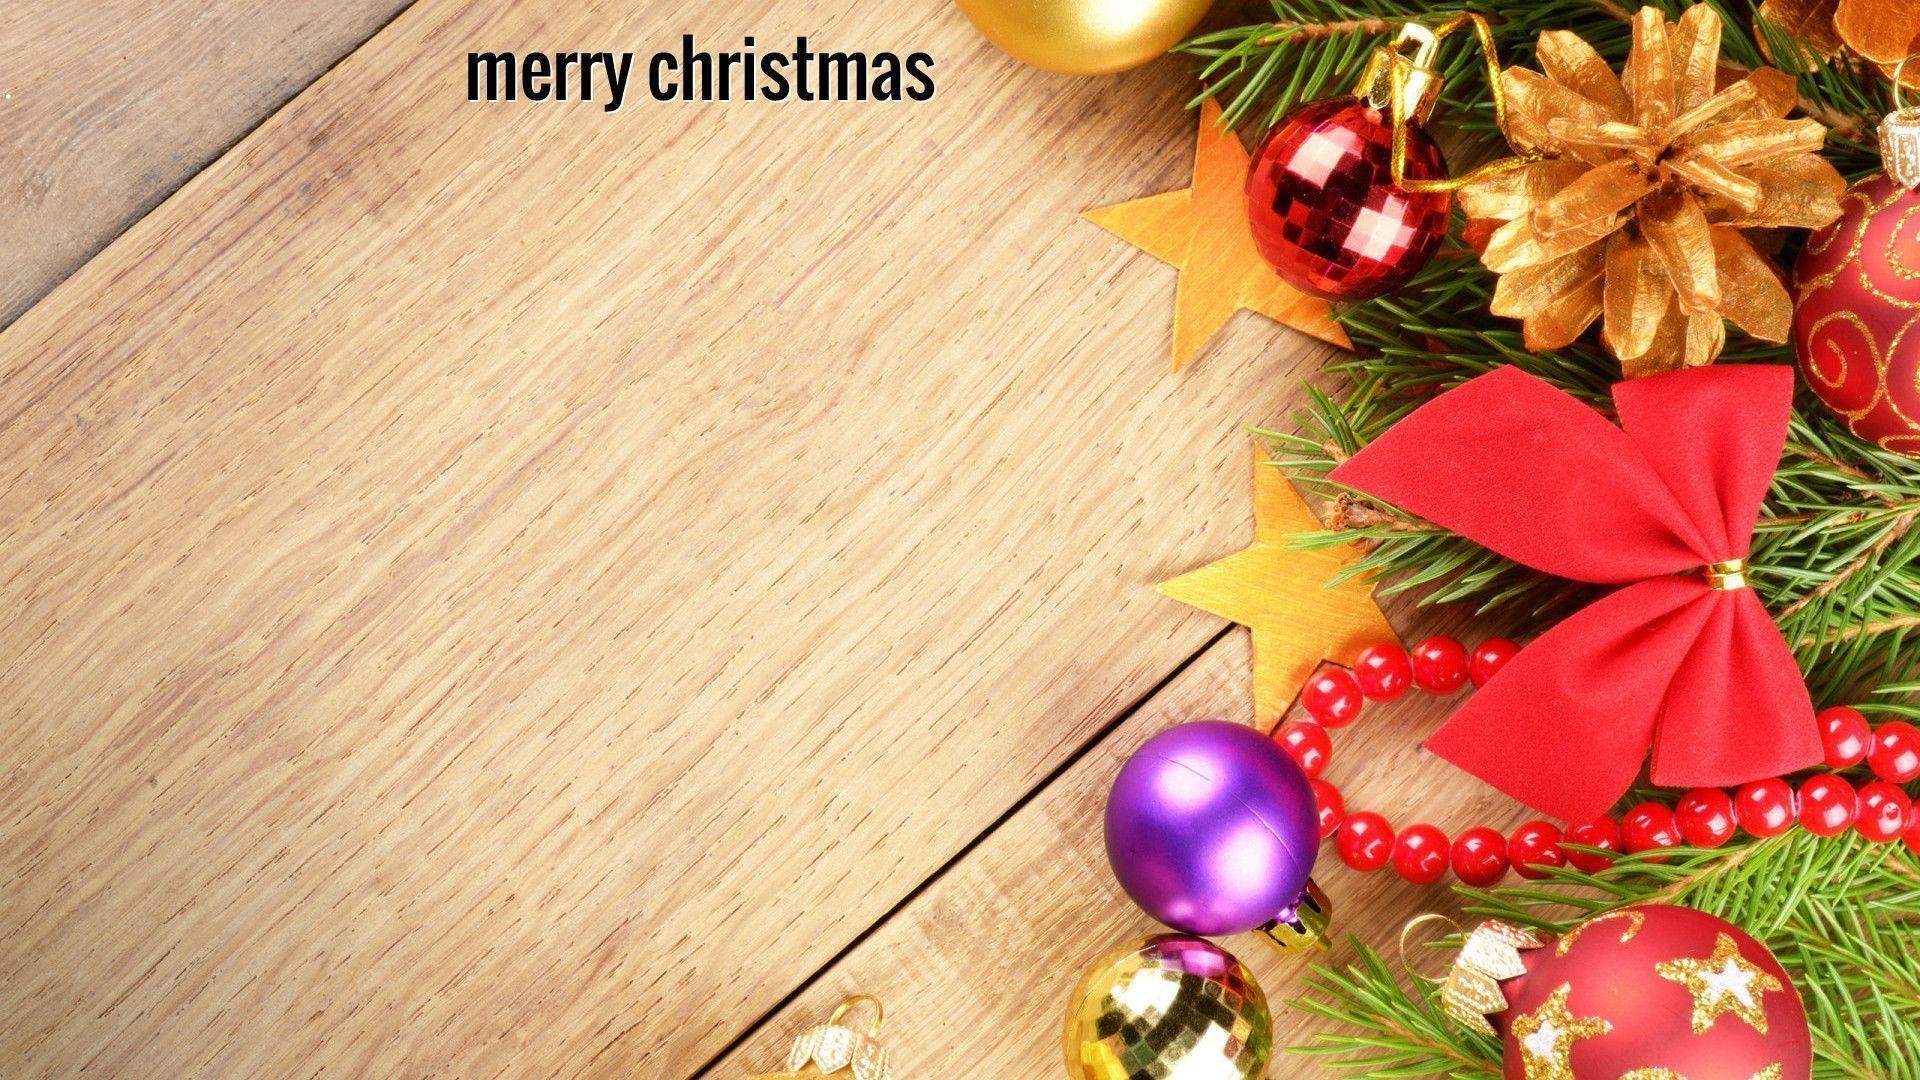 1920x1080 40 Cute Merry Christmas Wallpapers to Download For Free